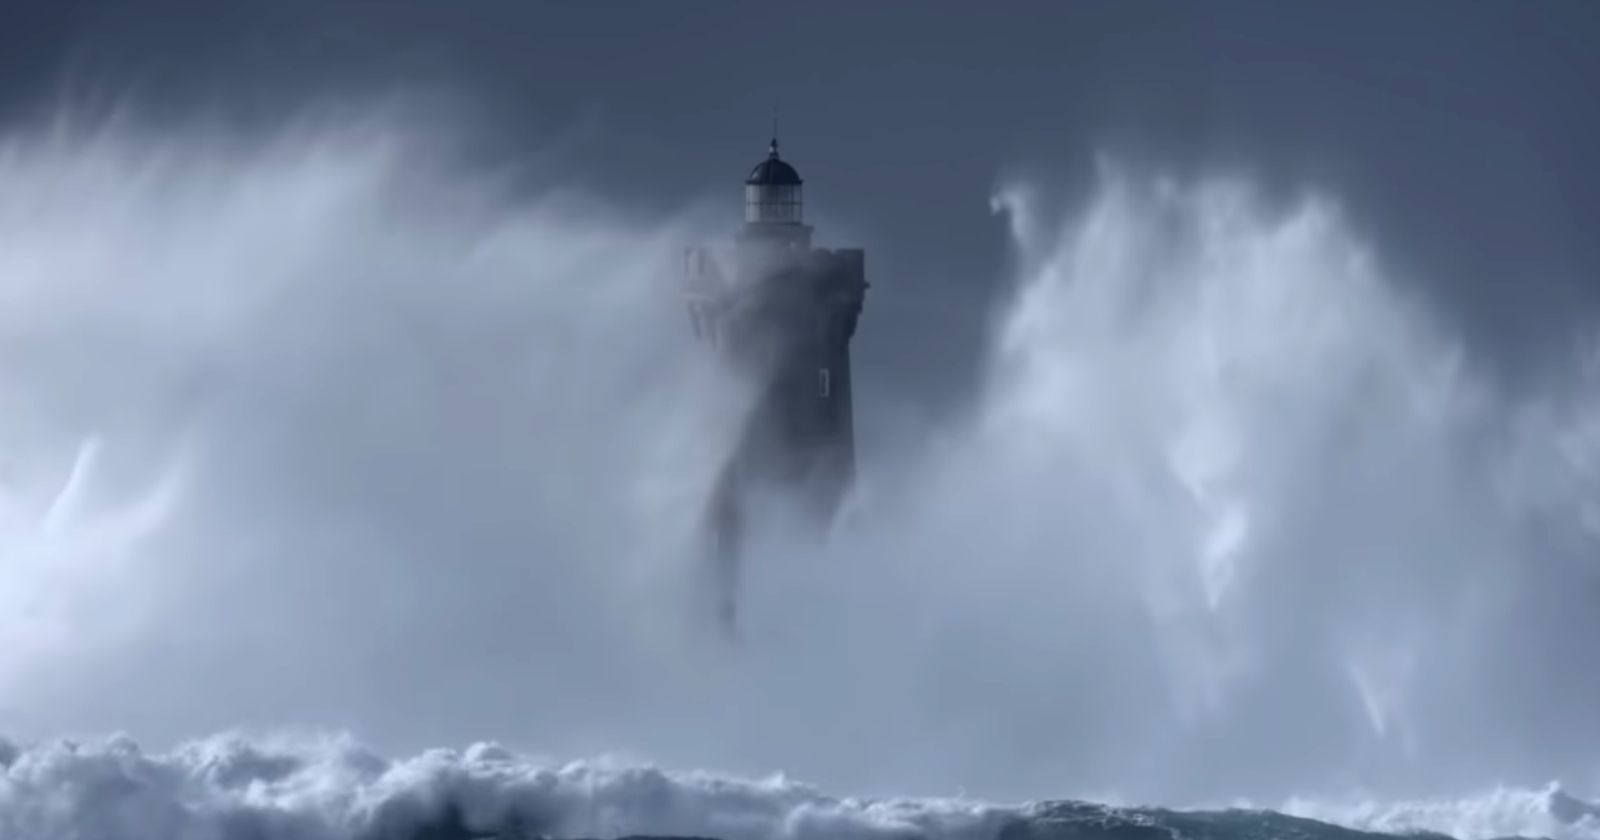 The storm Eunice filmed by Breton photographers: a beautiful video